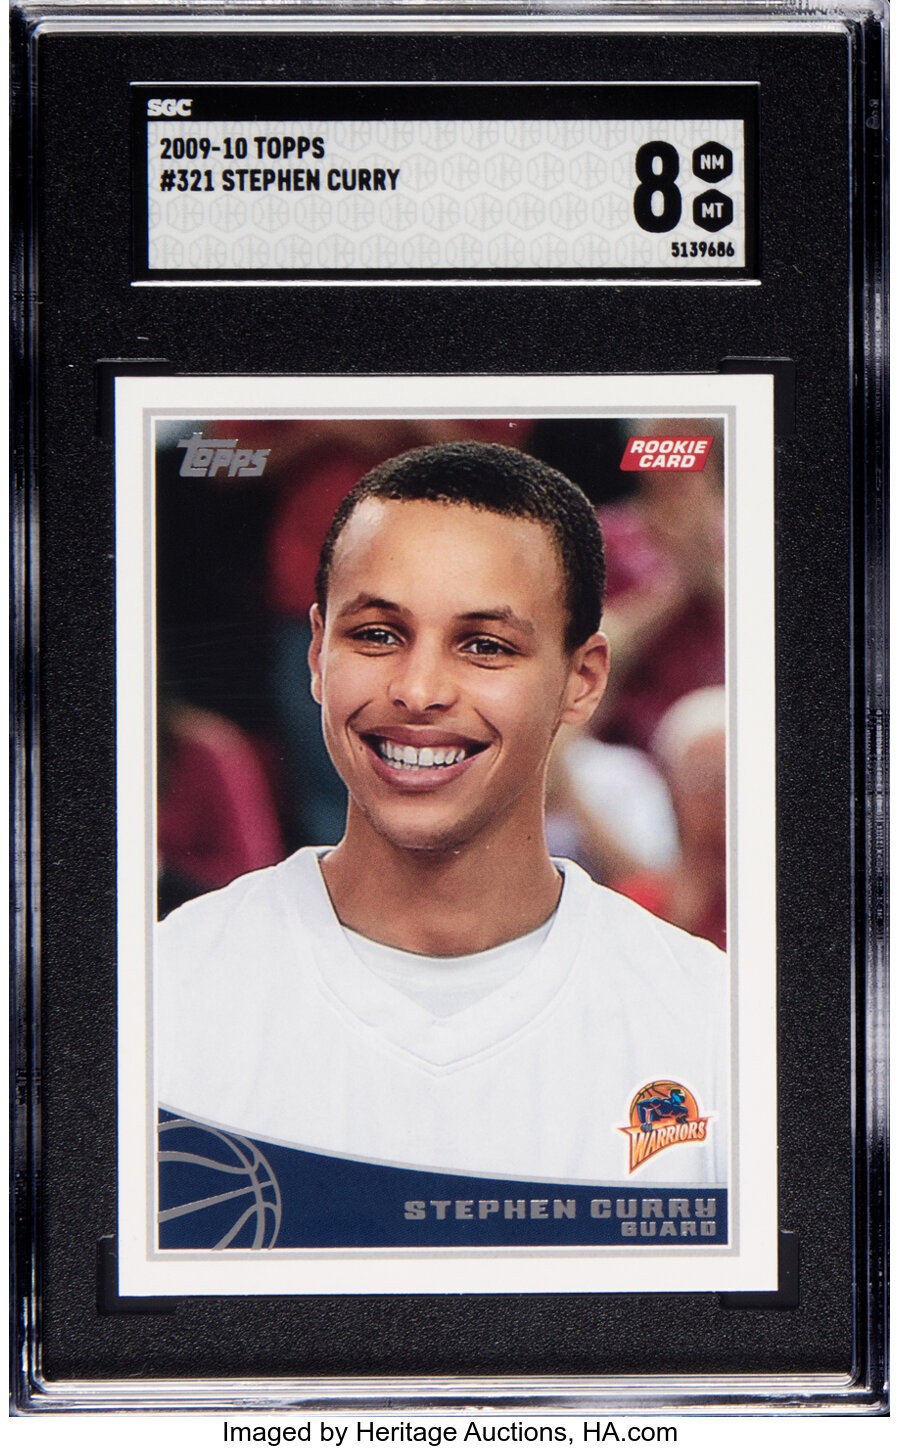 2009 Topps Stephen Curry #321 SGC NM/MT 8